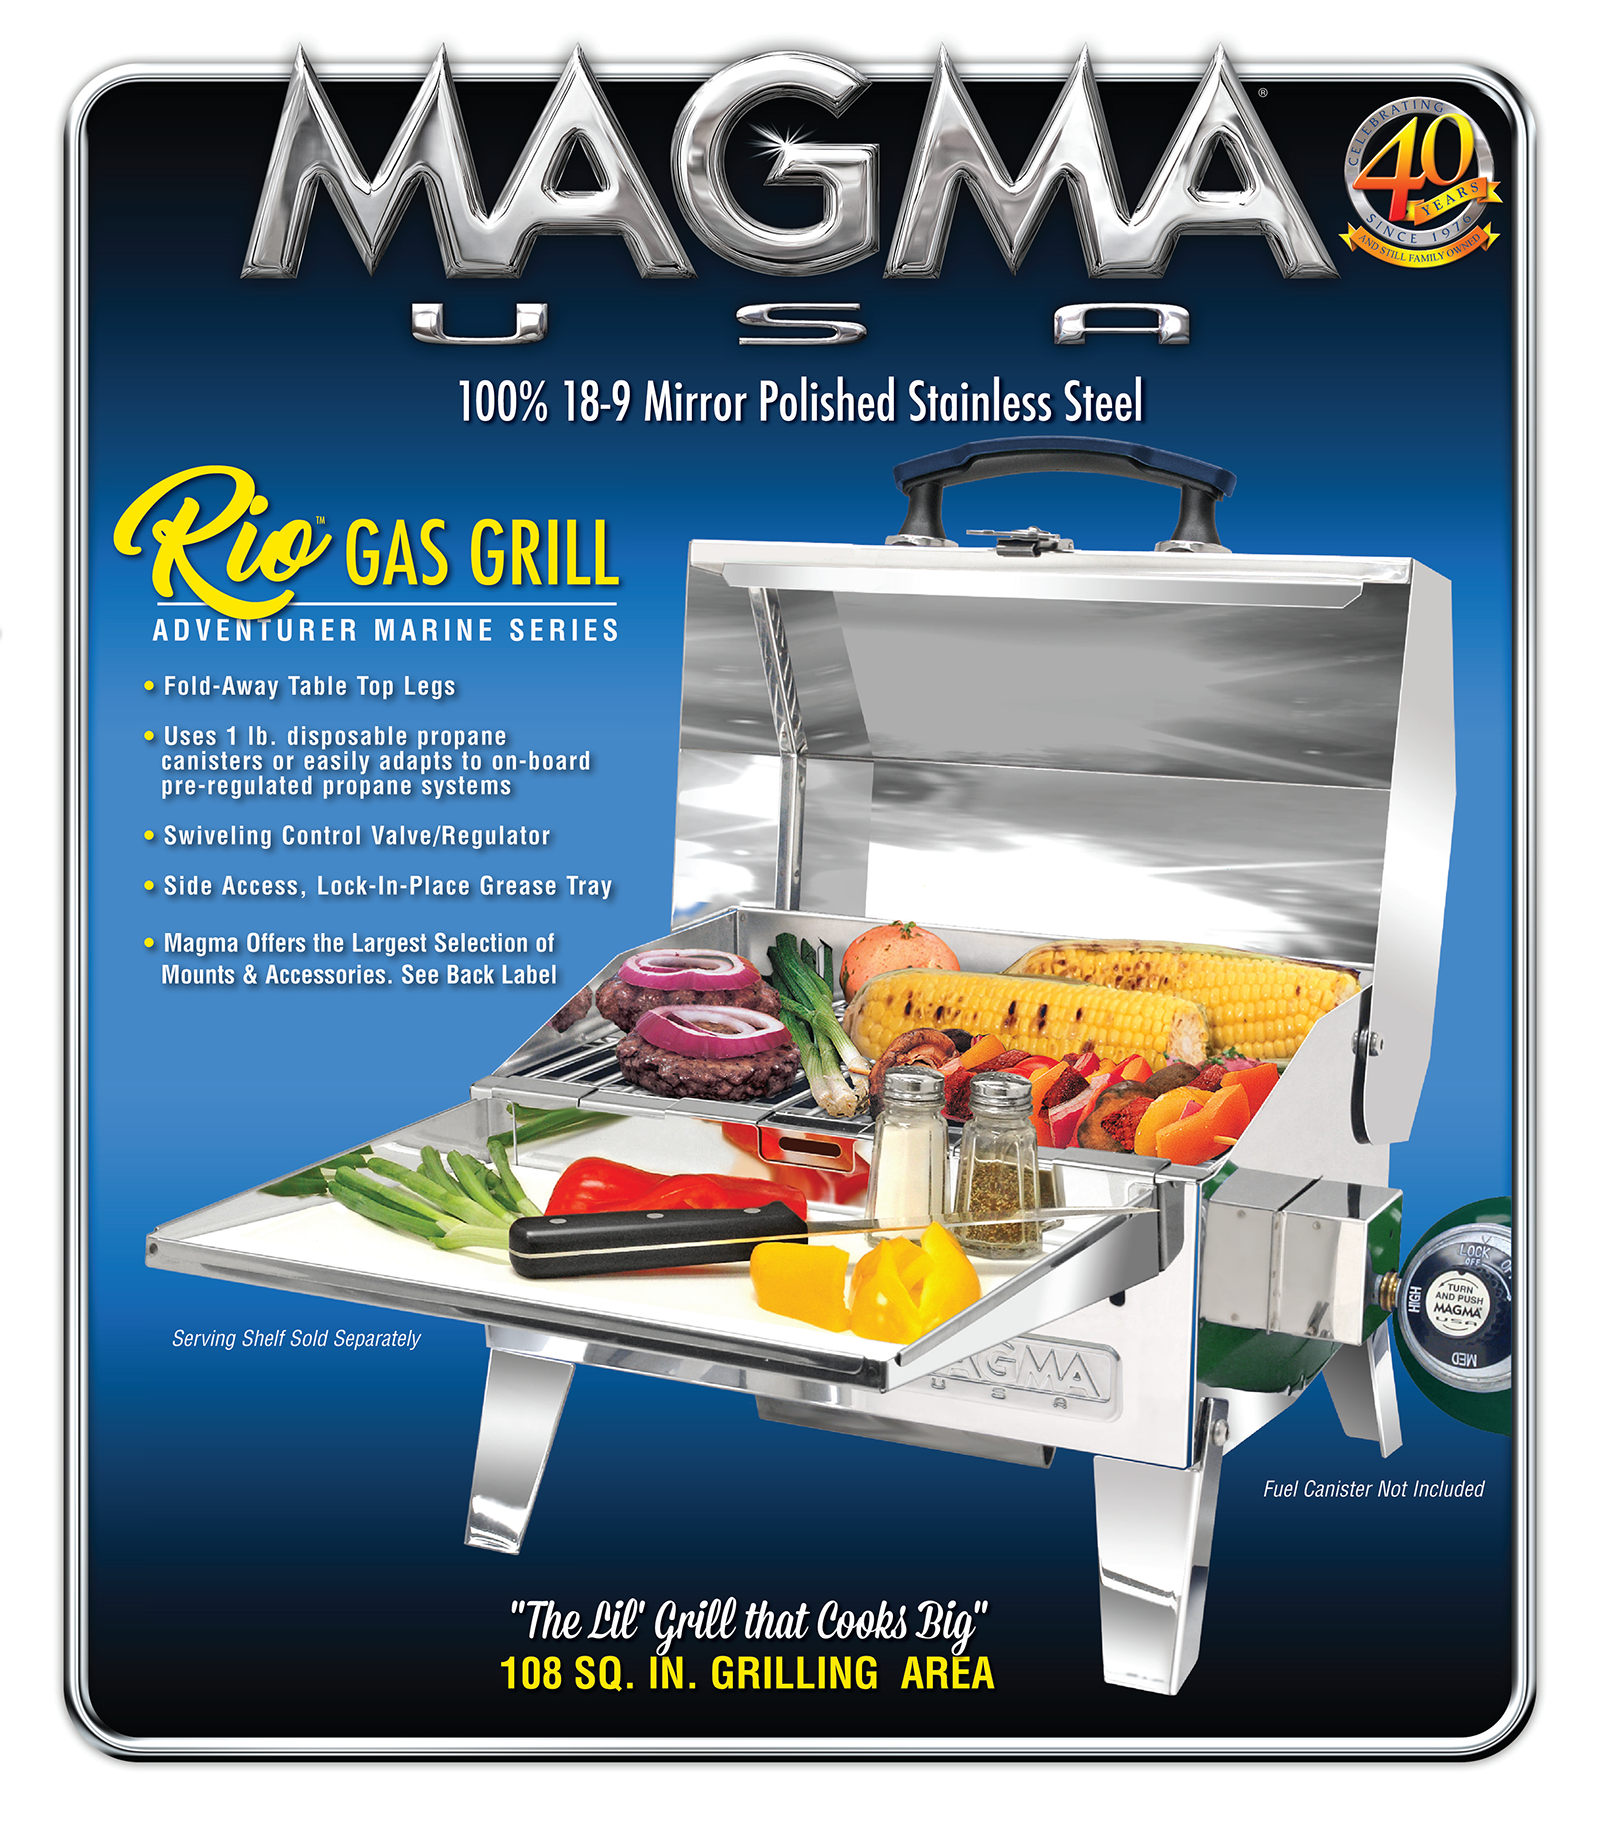 Magma Adventurer Marine Series Cabo GAS Grill